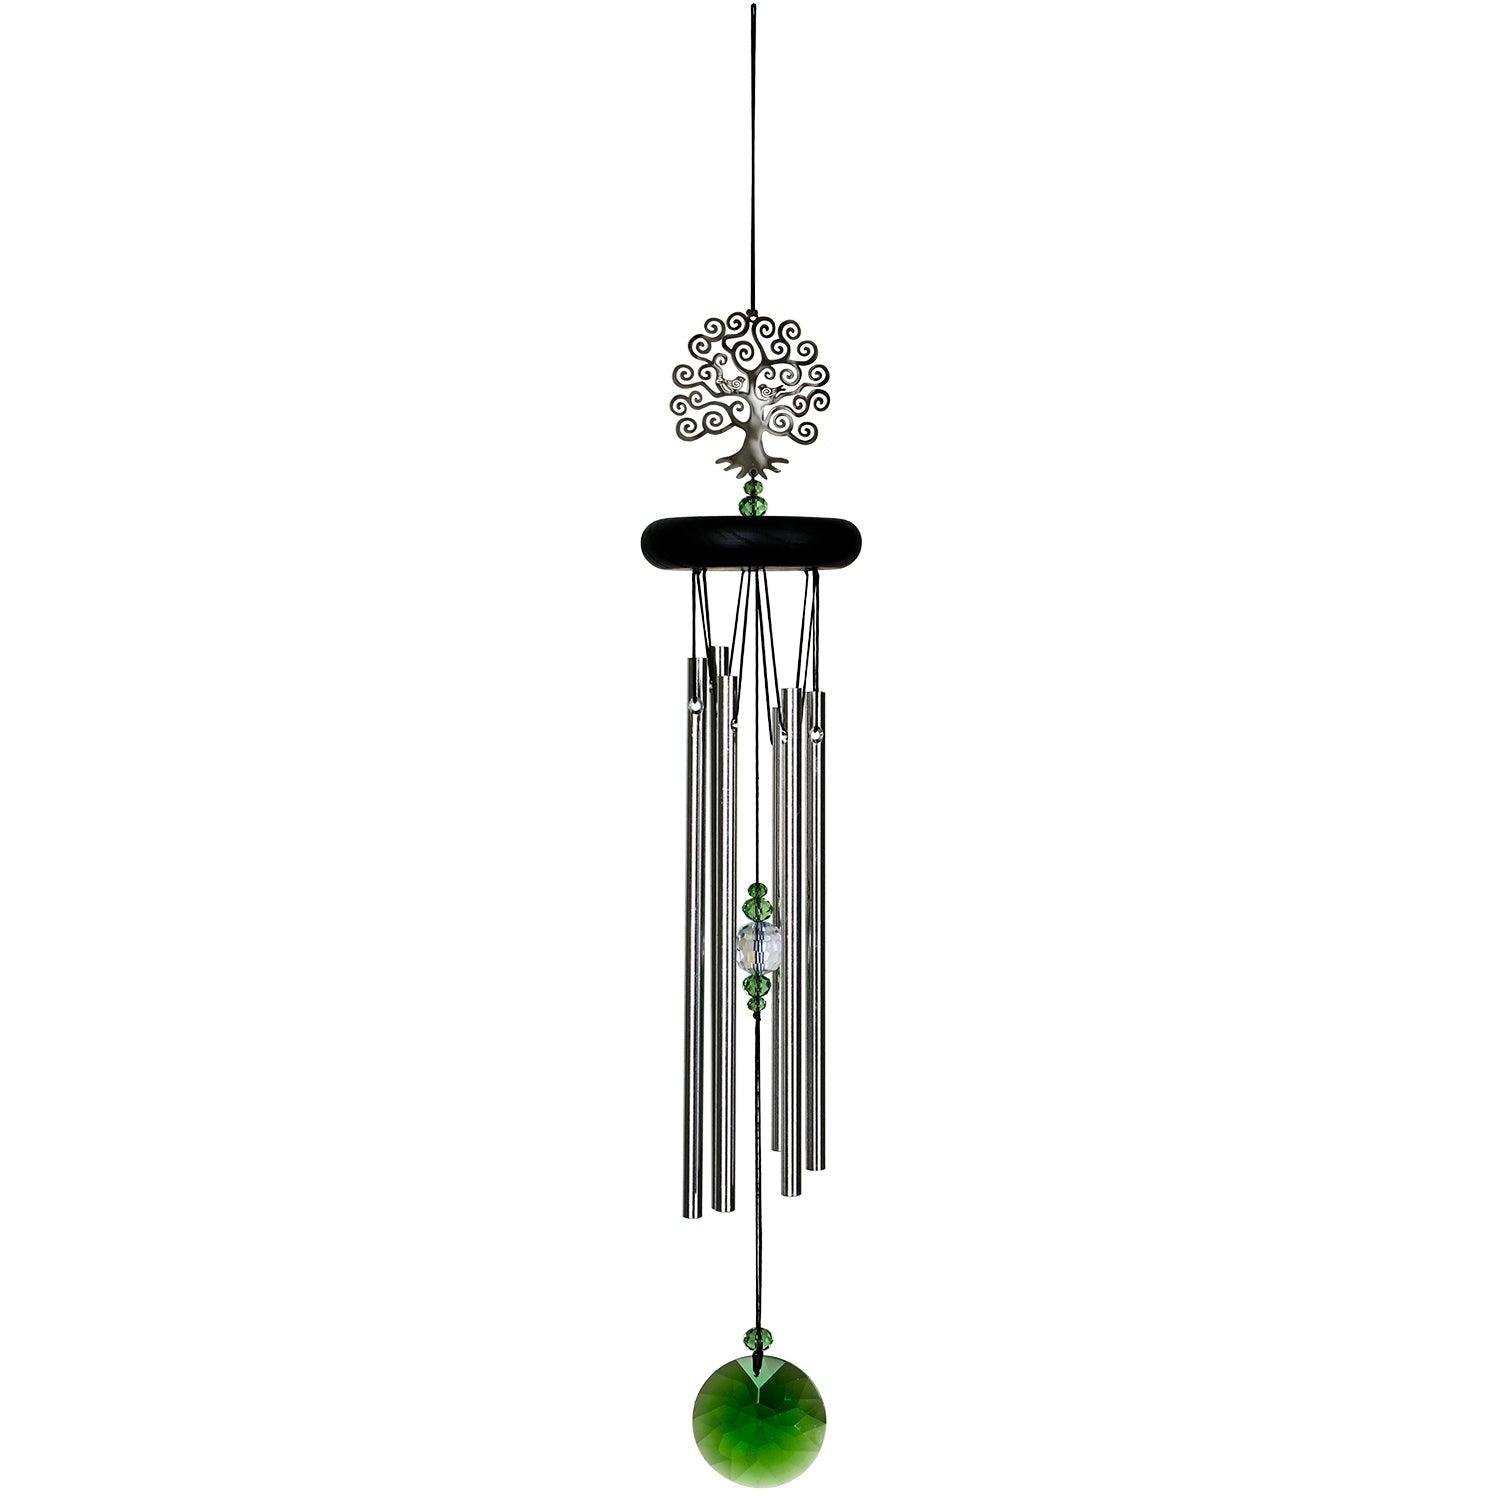 Inviting crystal accents and peaceful sounds create a calming atmosphere for reflection. Crafted from black ash wood with six sturdy silver aluminum rods, measuring 19 inches in length with a 3 inch diameter.